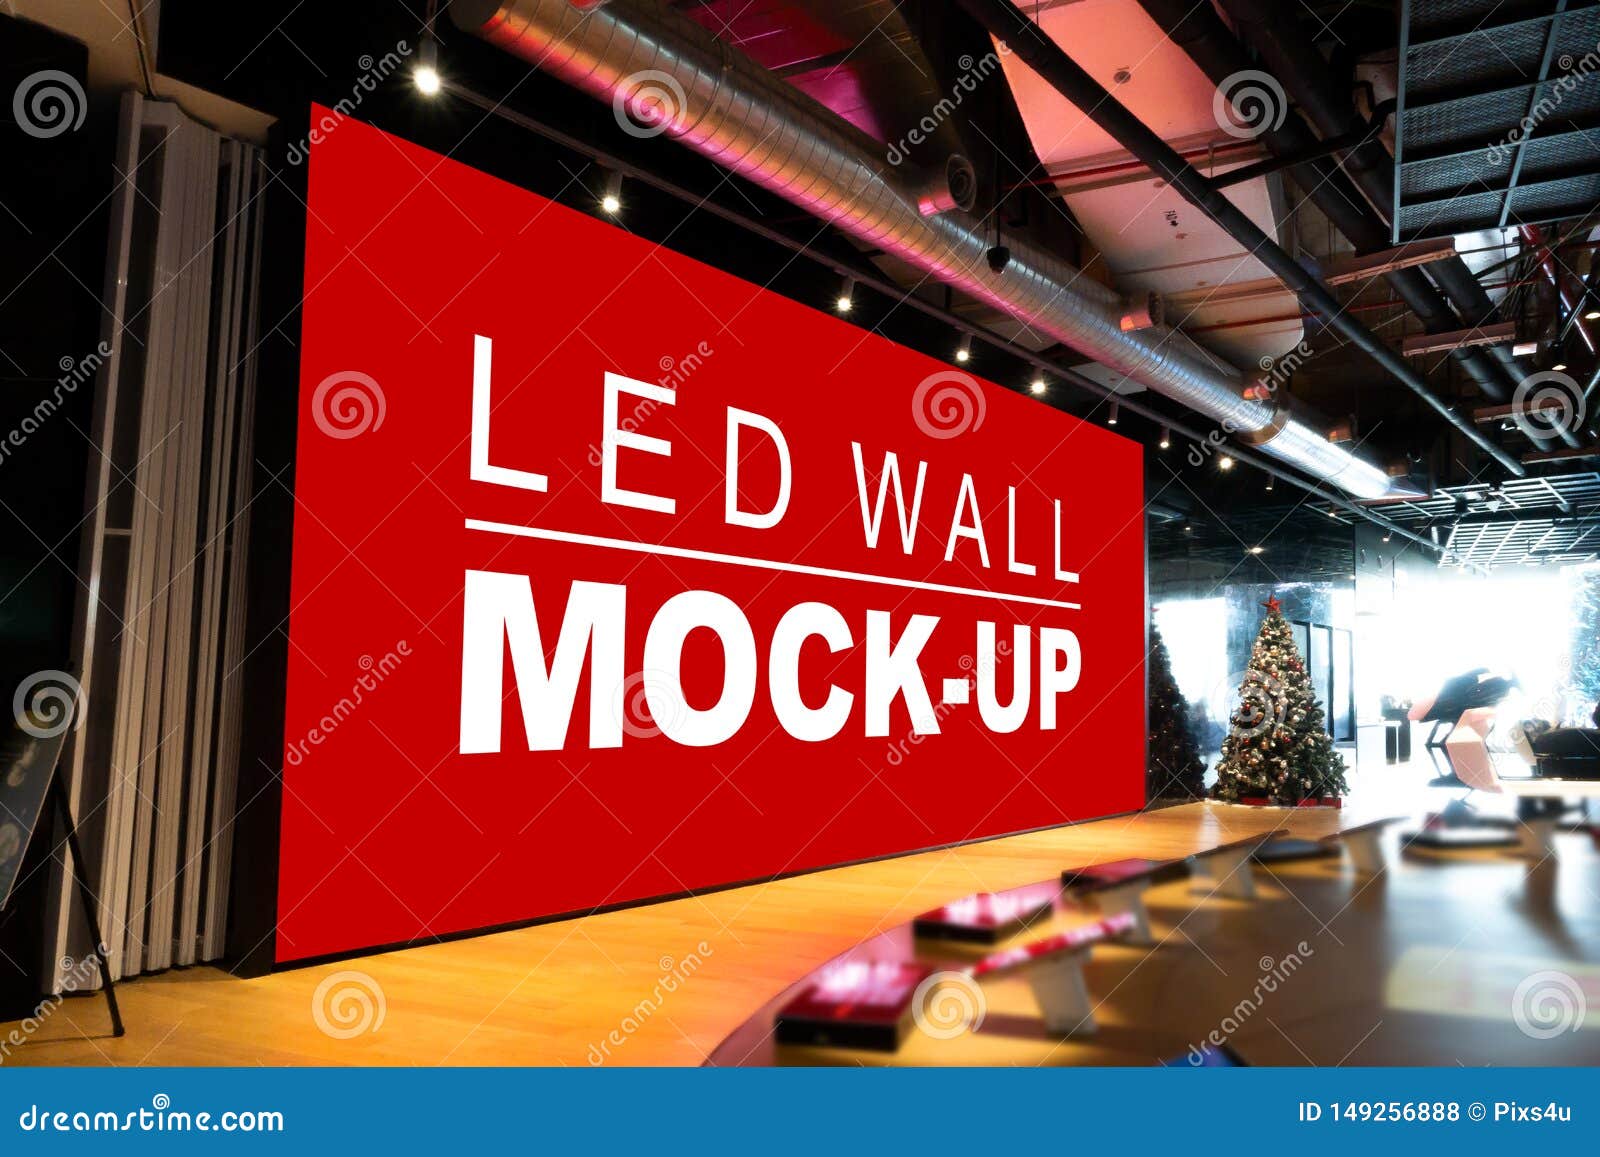 Download 196 Banner Mock Stage Up Photos Free Royalty Free Stock Photos From Dreamstime